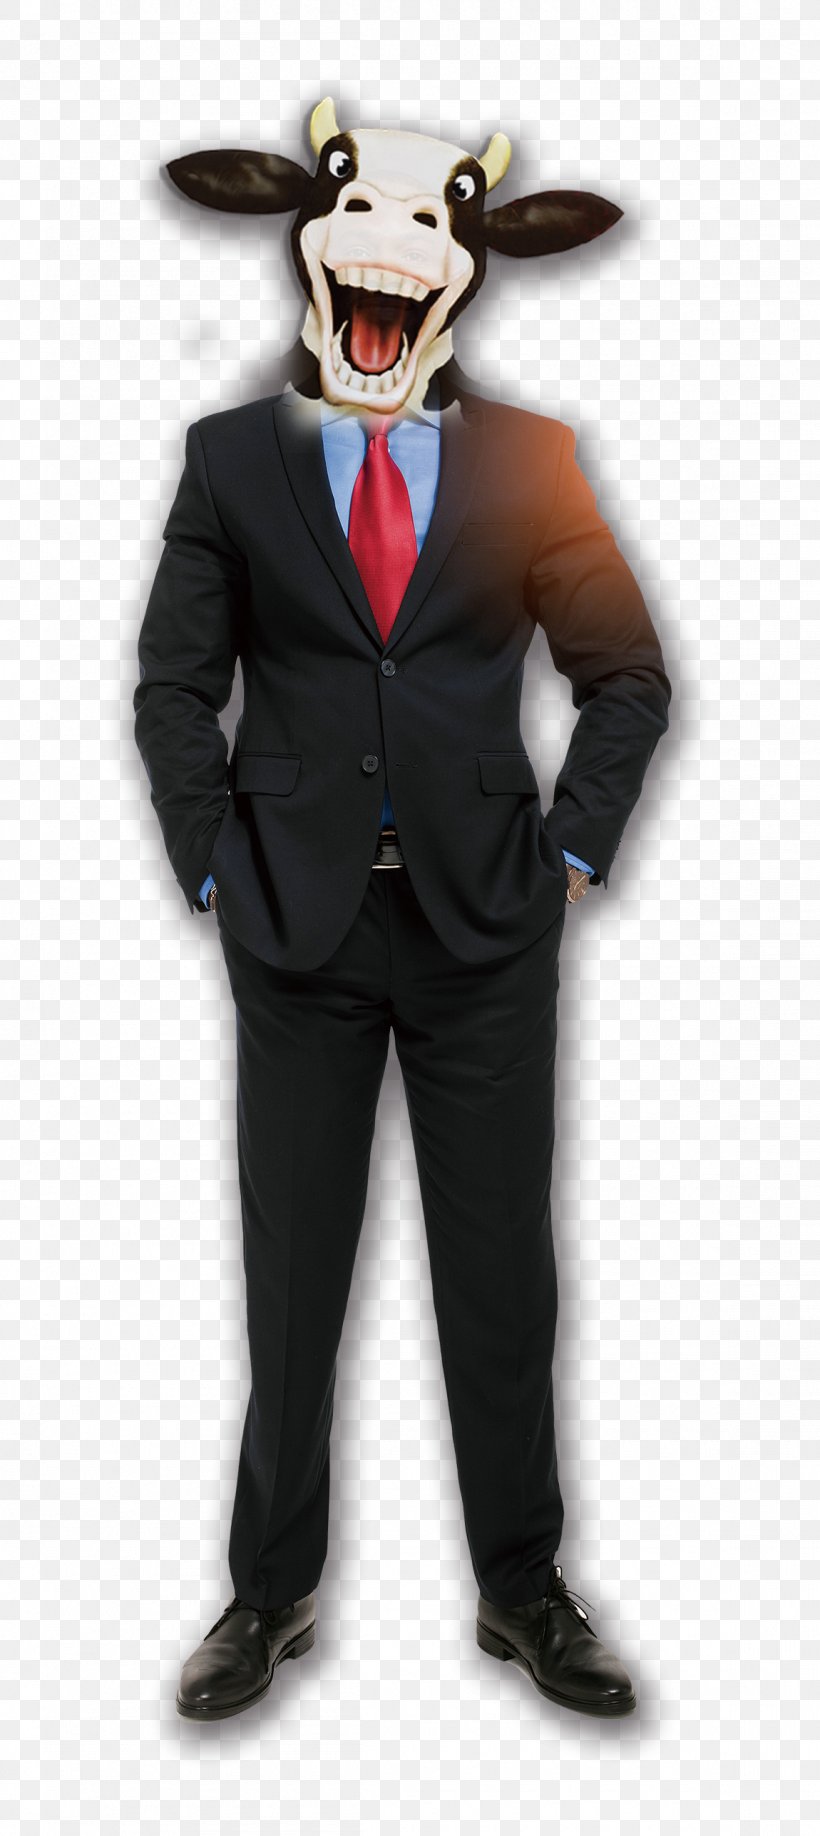 Businessperson Suit Icon, PNG, 1150x2575px, Businessperson, Business, Clown, Concept, Costume Download Free